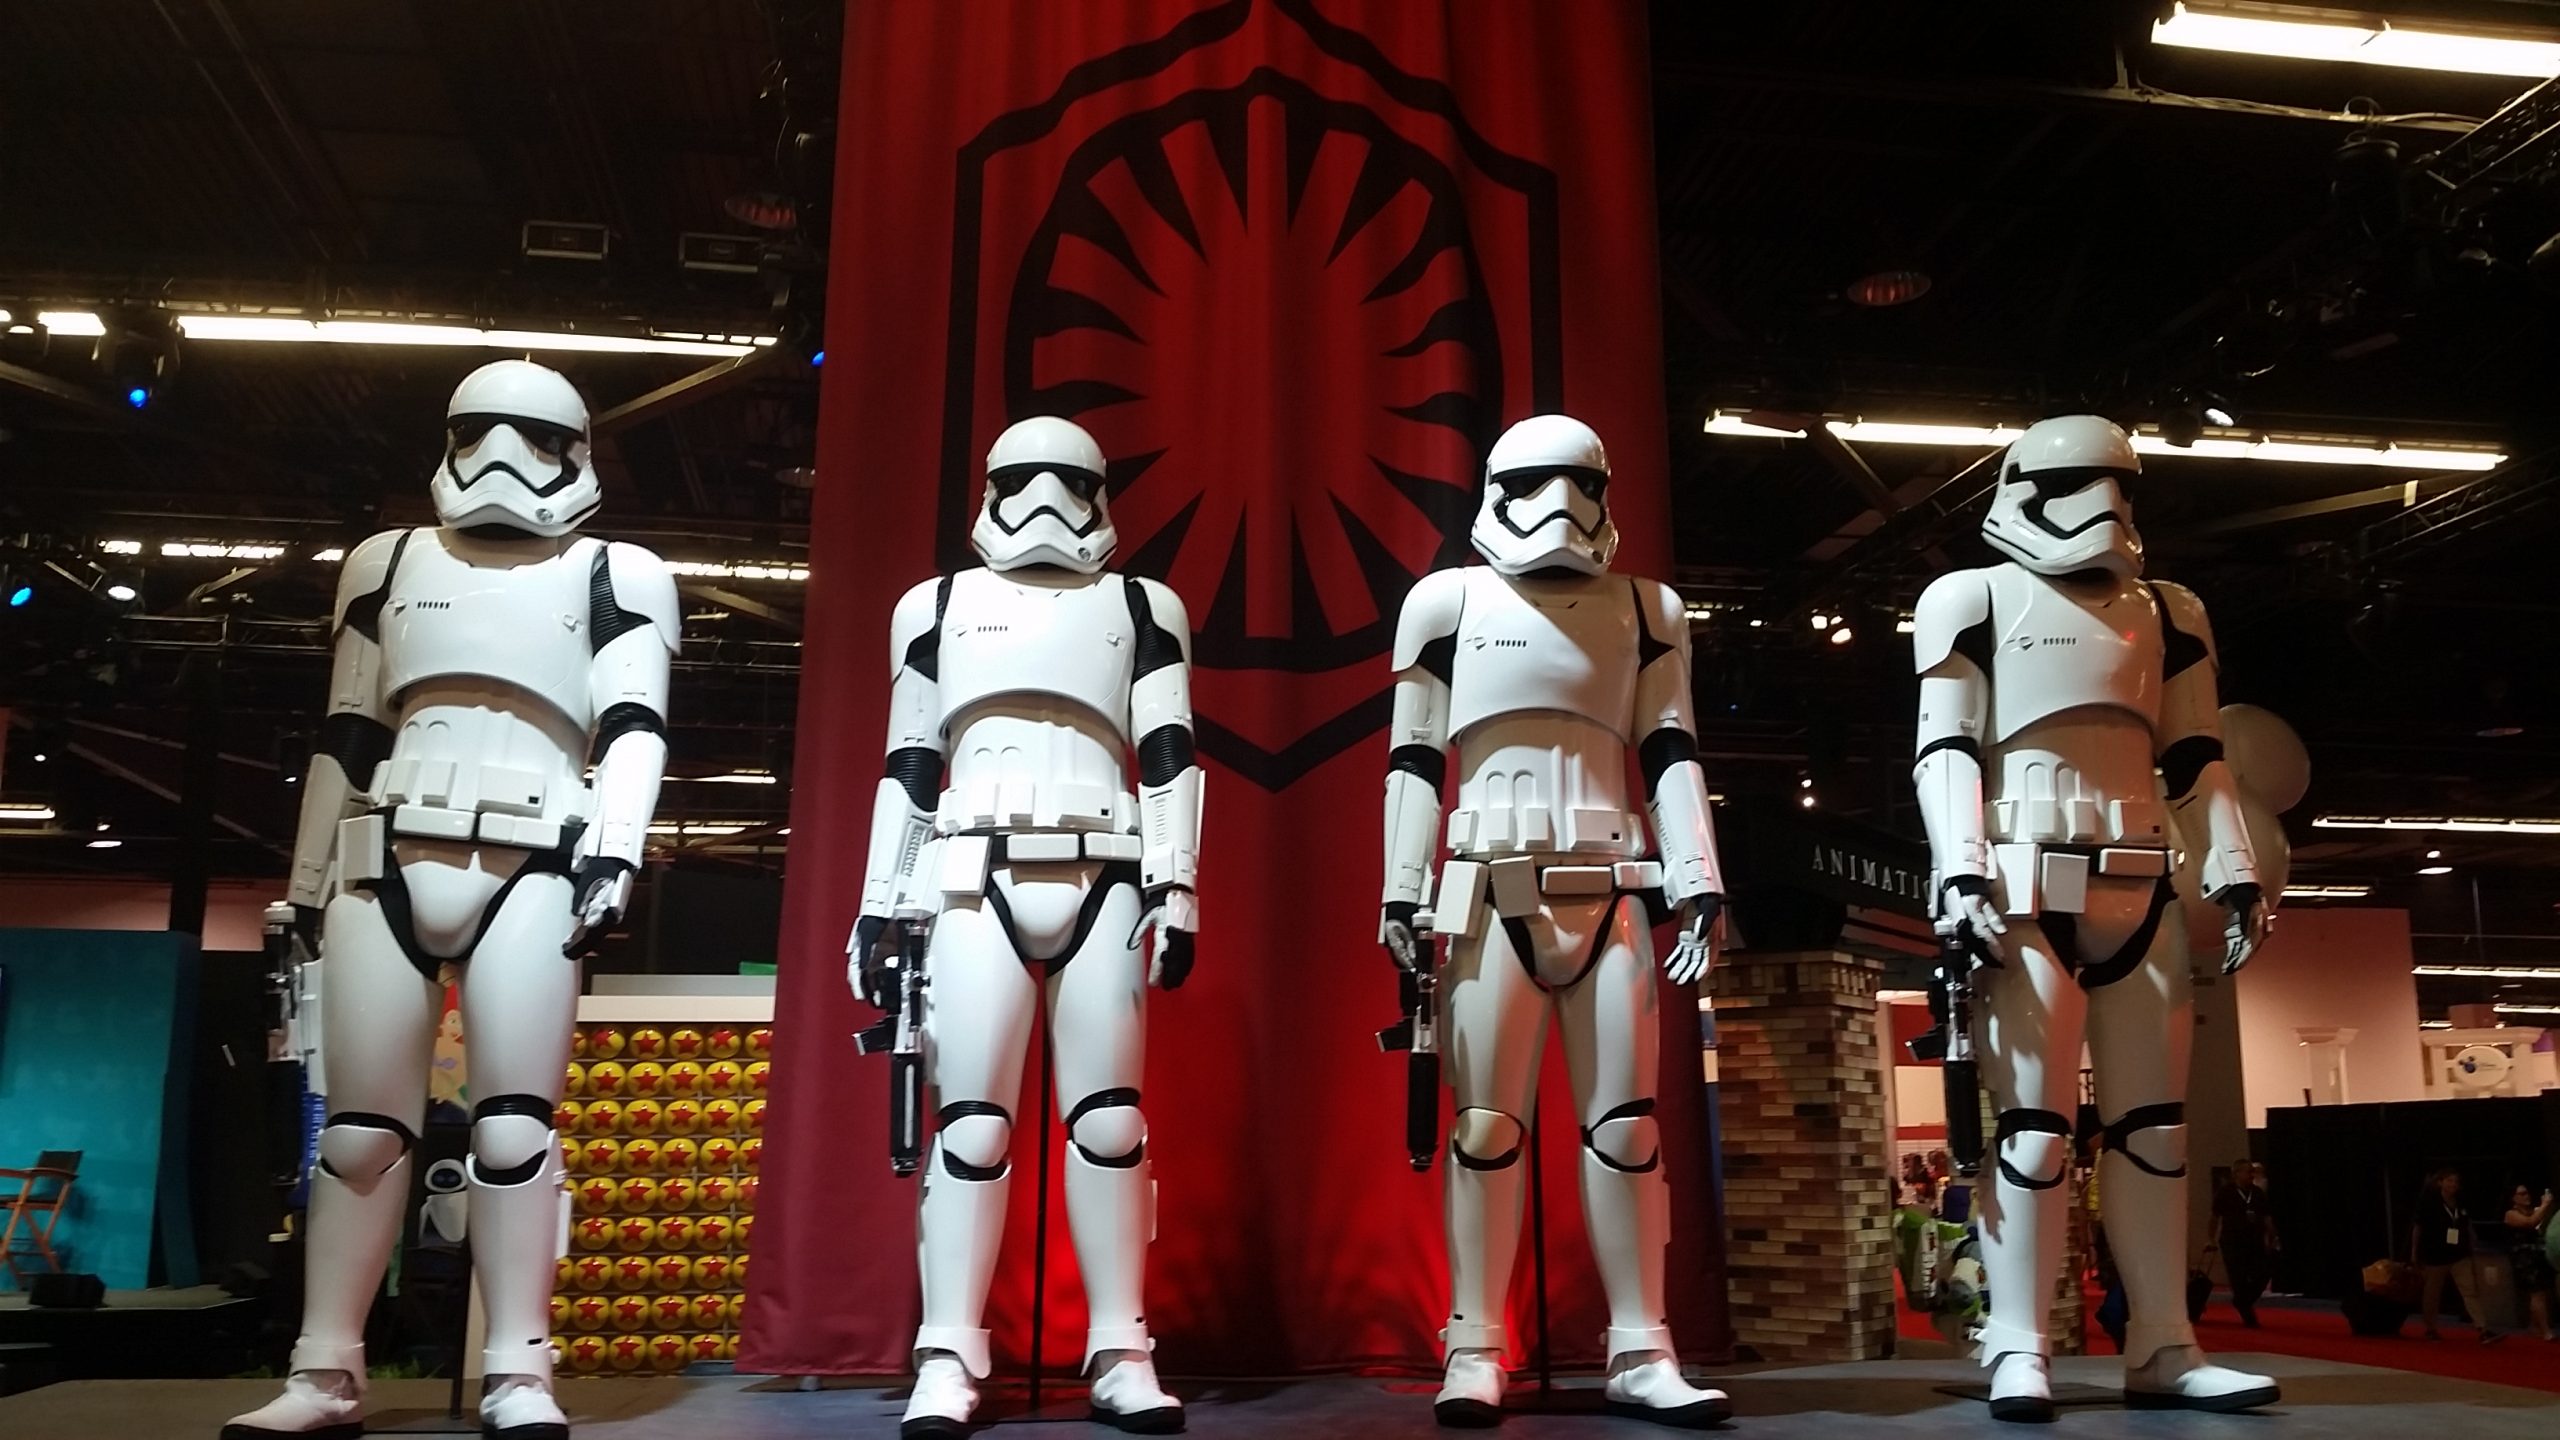 D23: Here Are Those Star Wars: The Force Awakens Costumes from the Showfloor